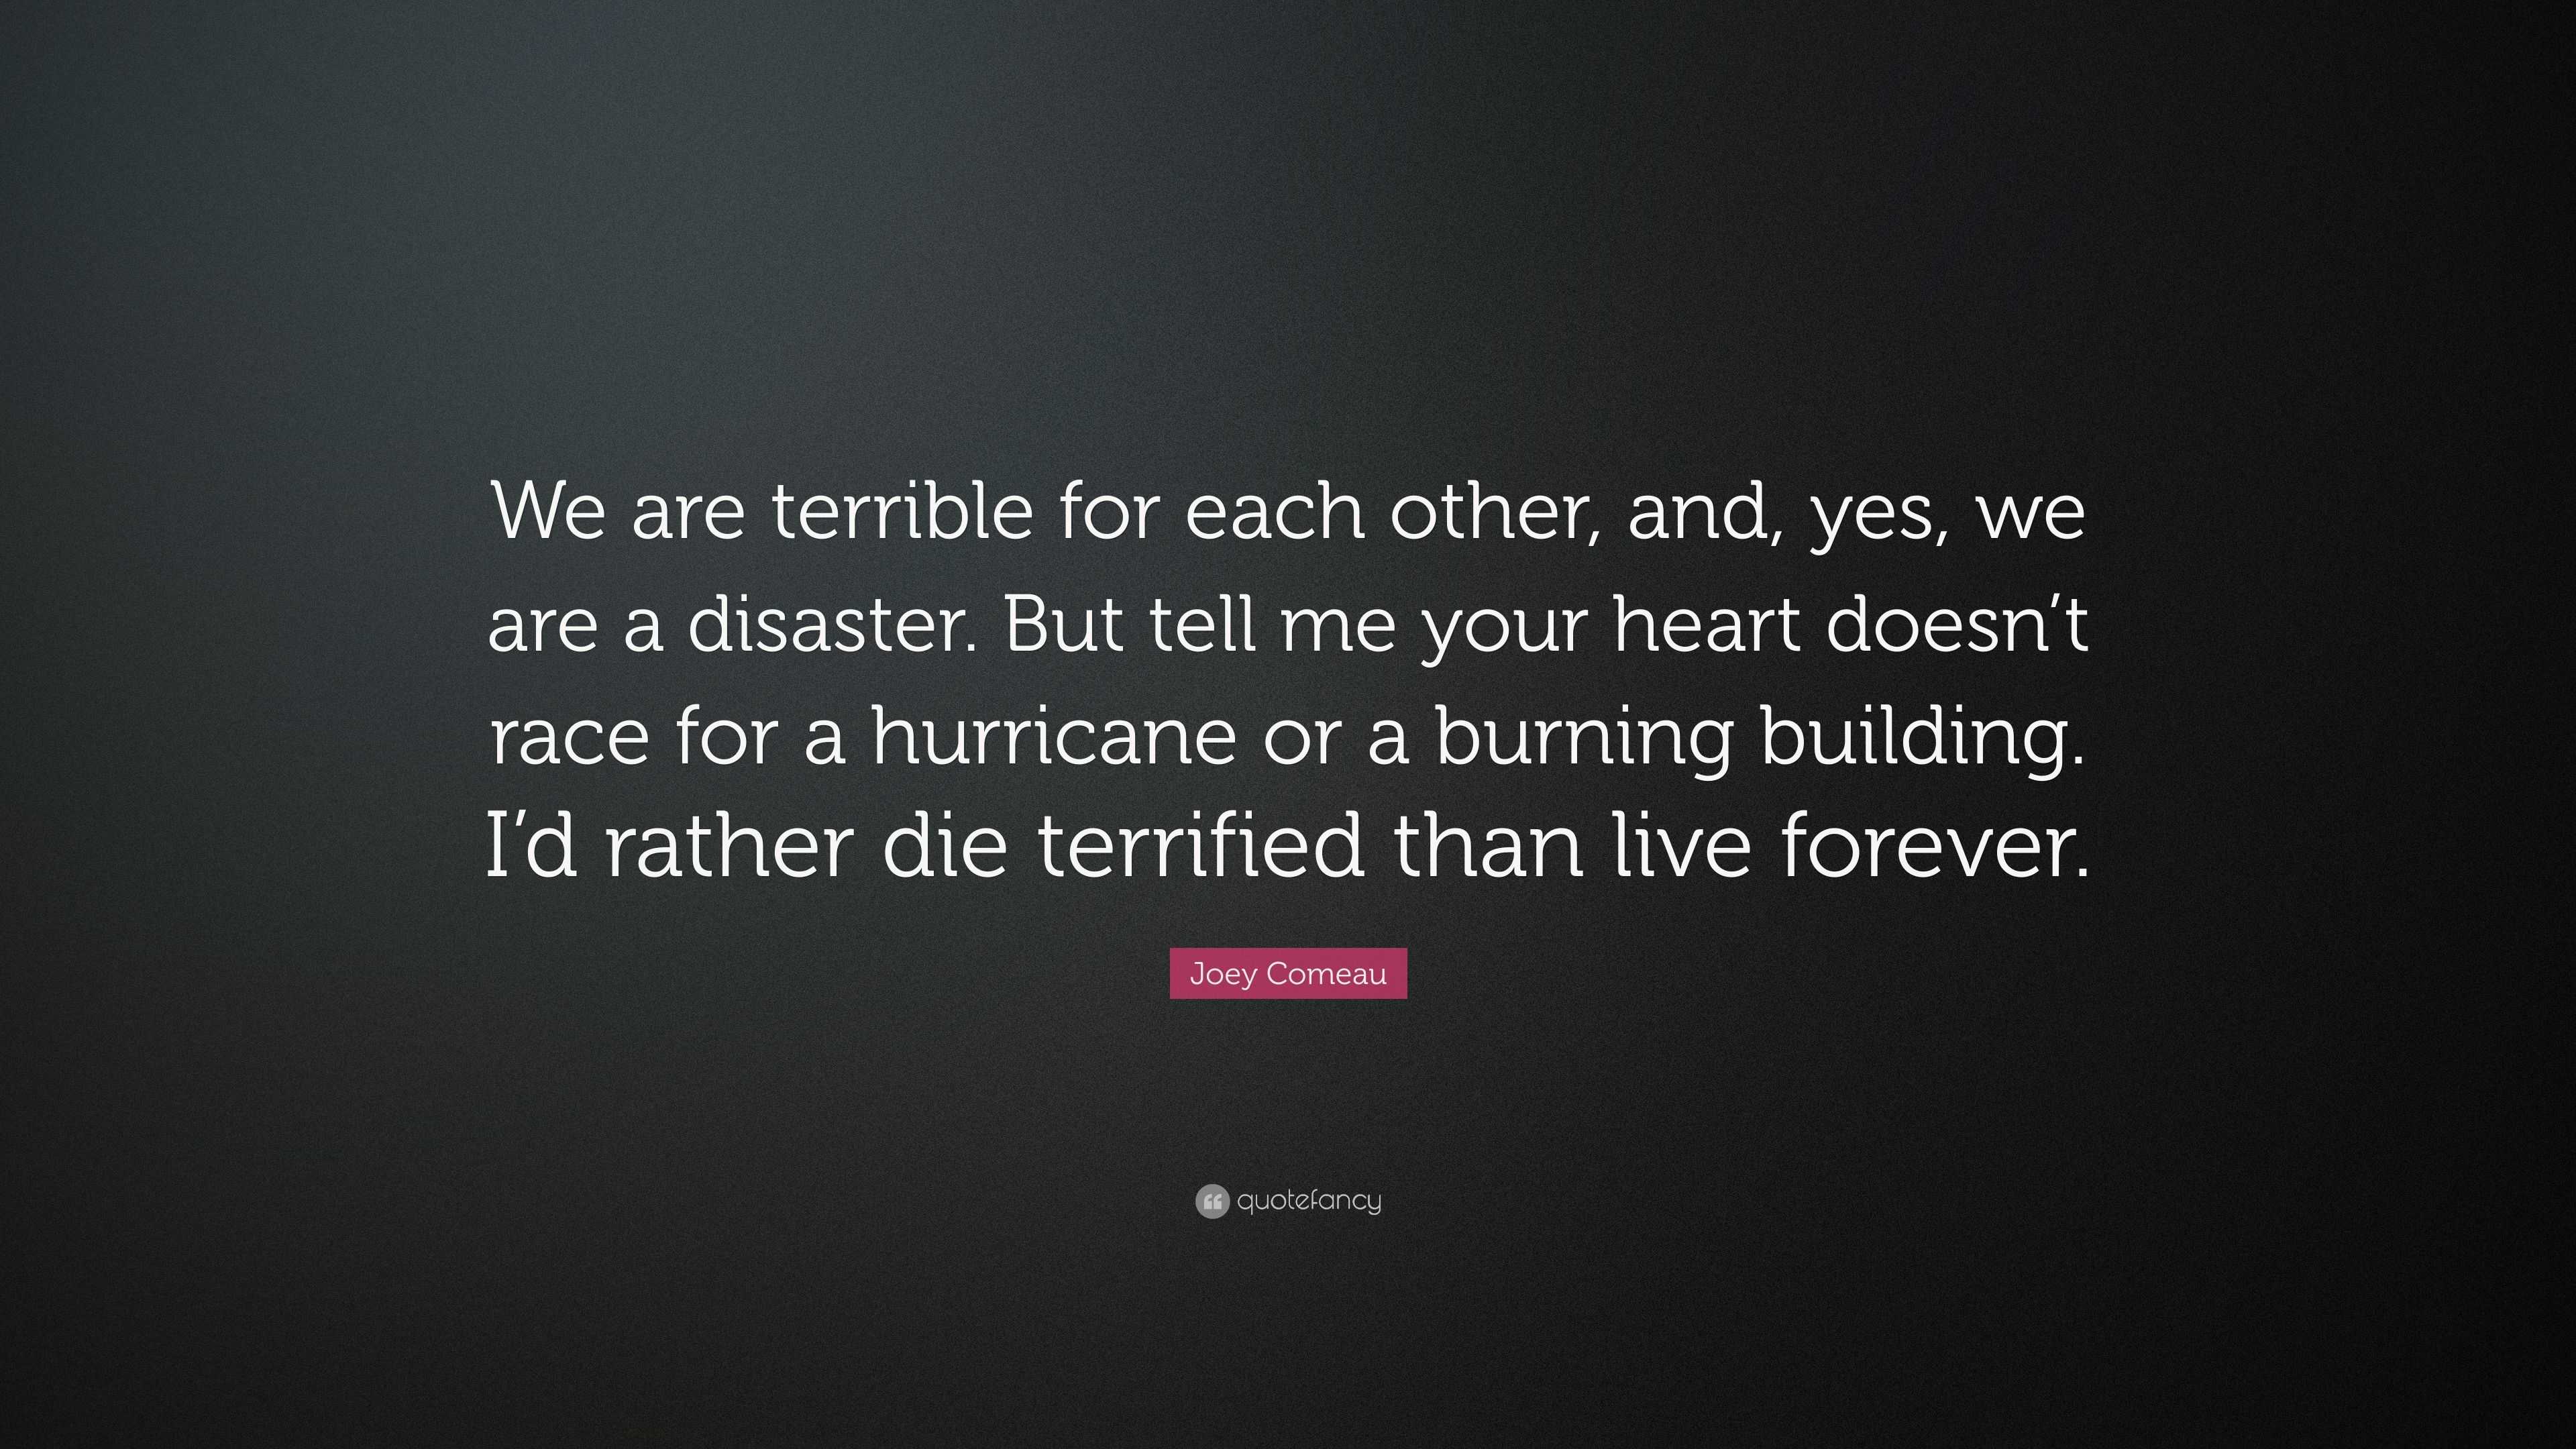 https://quotefancy.com/media/wallpaper/3840x2160/3115623-Joey-Comeau-Quote-We-are-terrible-for-each-other-and-yes-we-are-a.jpg